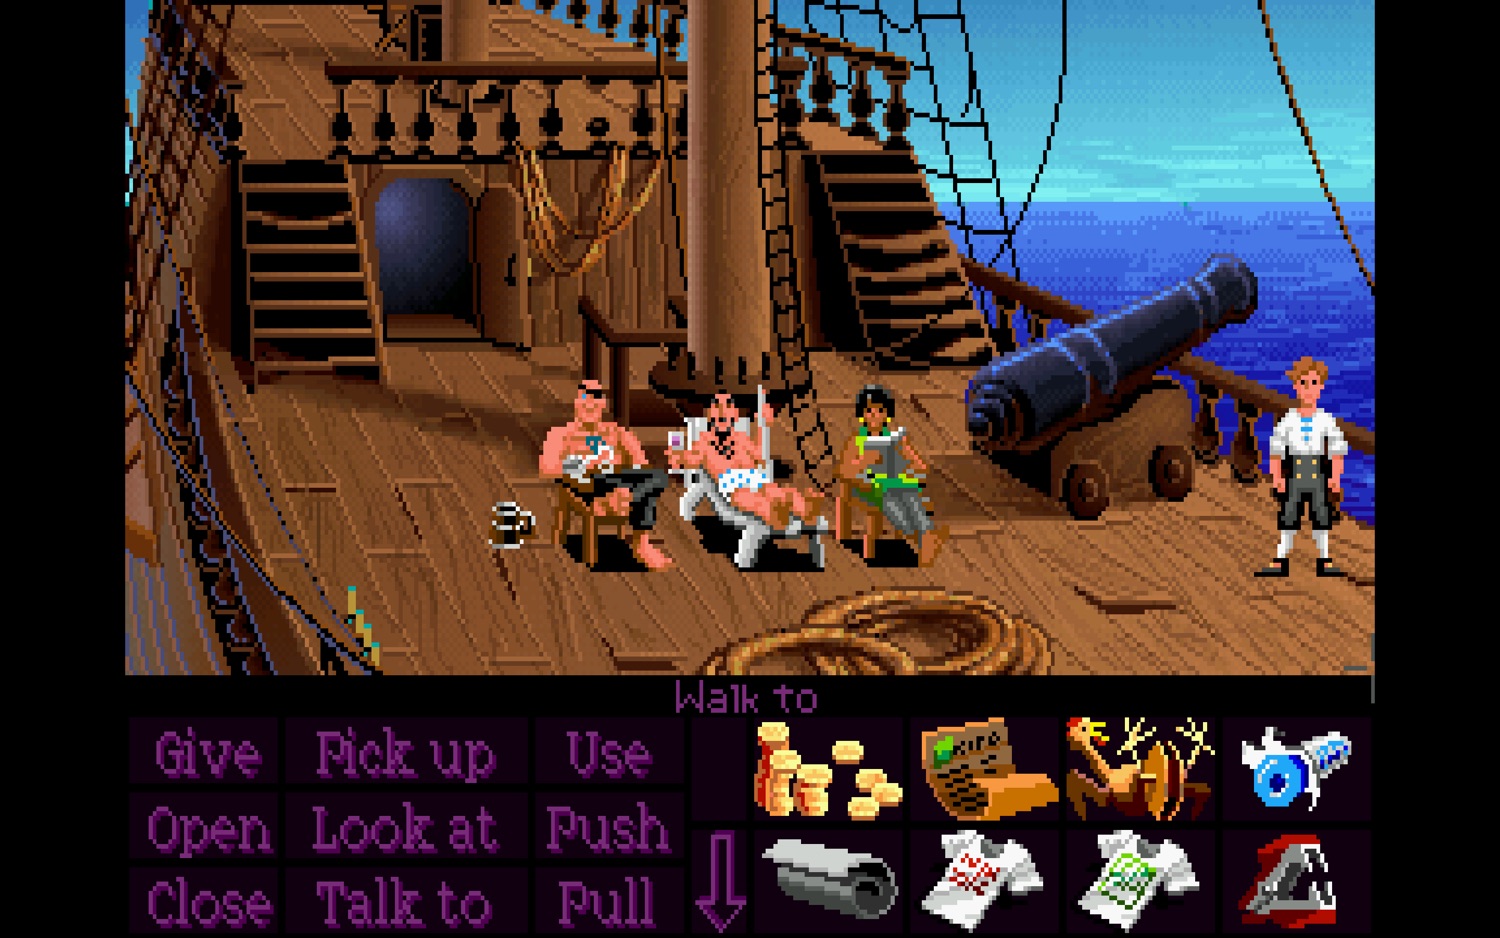 A screenshot of the original version of the Secret of Monkey Island where Guybrush is on his ship and the rest of the crew are ignoring him and sunbathing